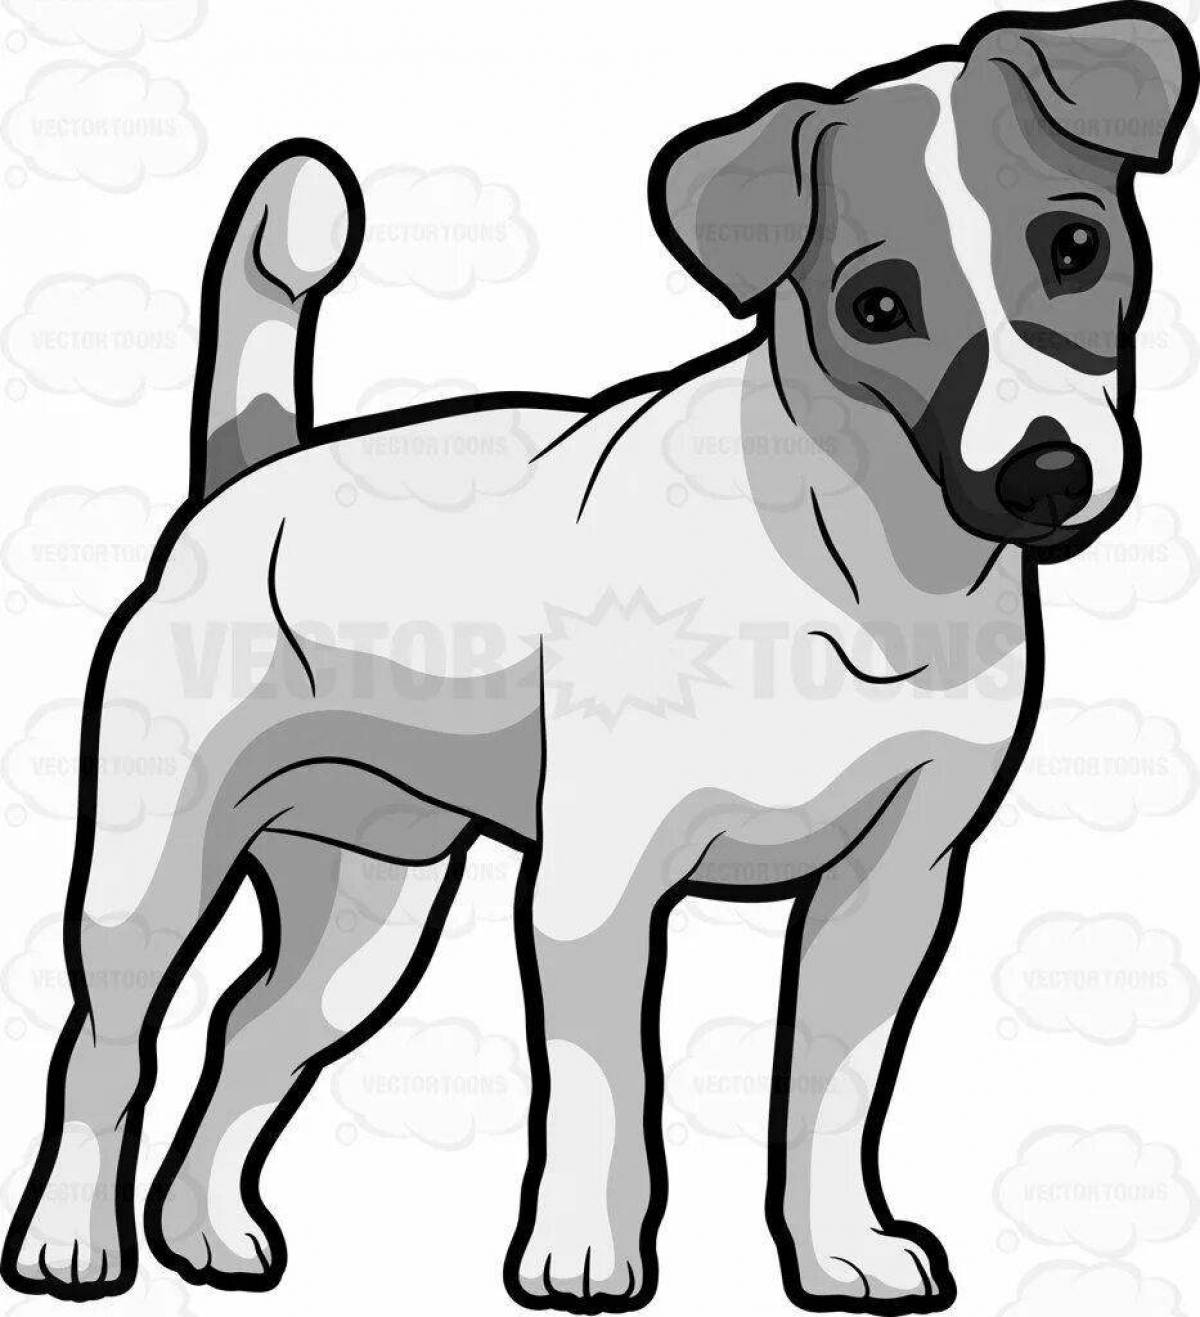 Jack Russell Terrier dog playful coloring book